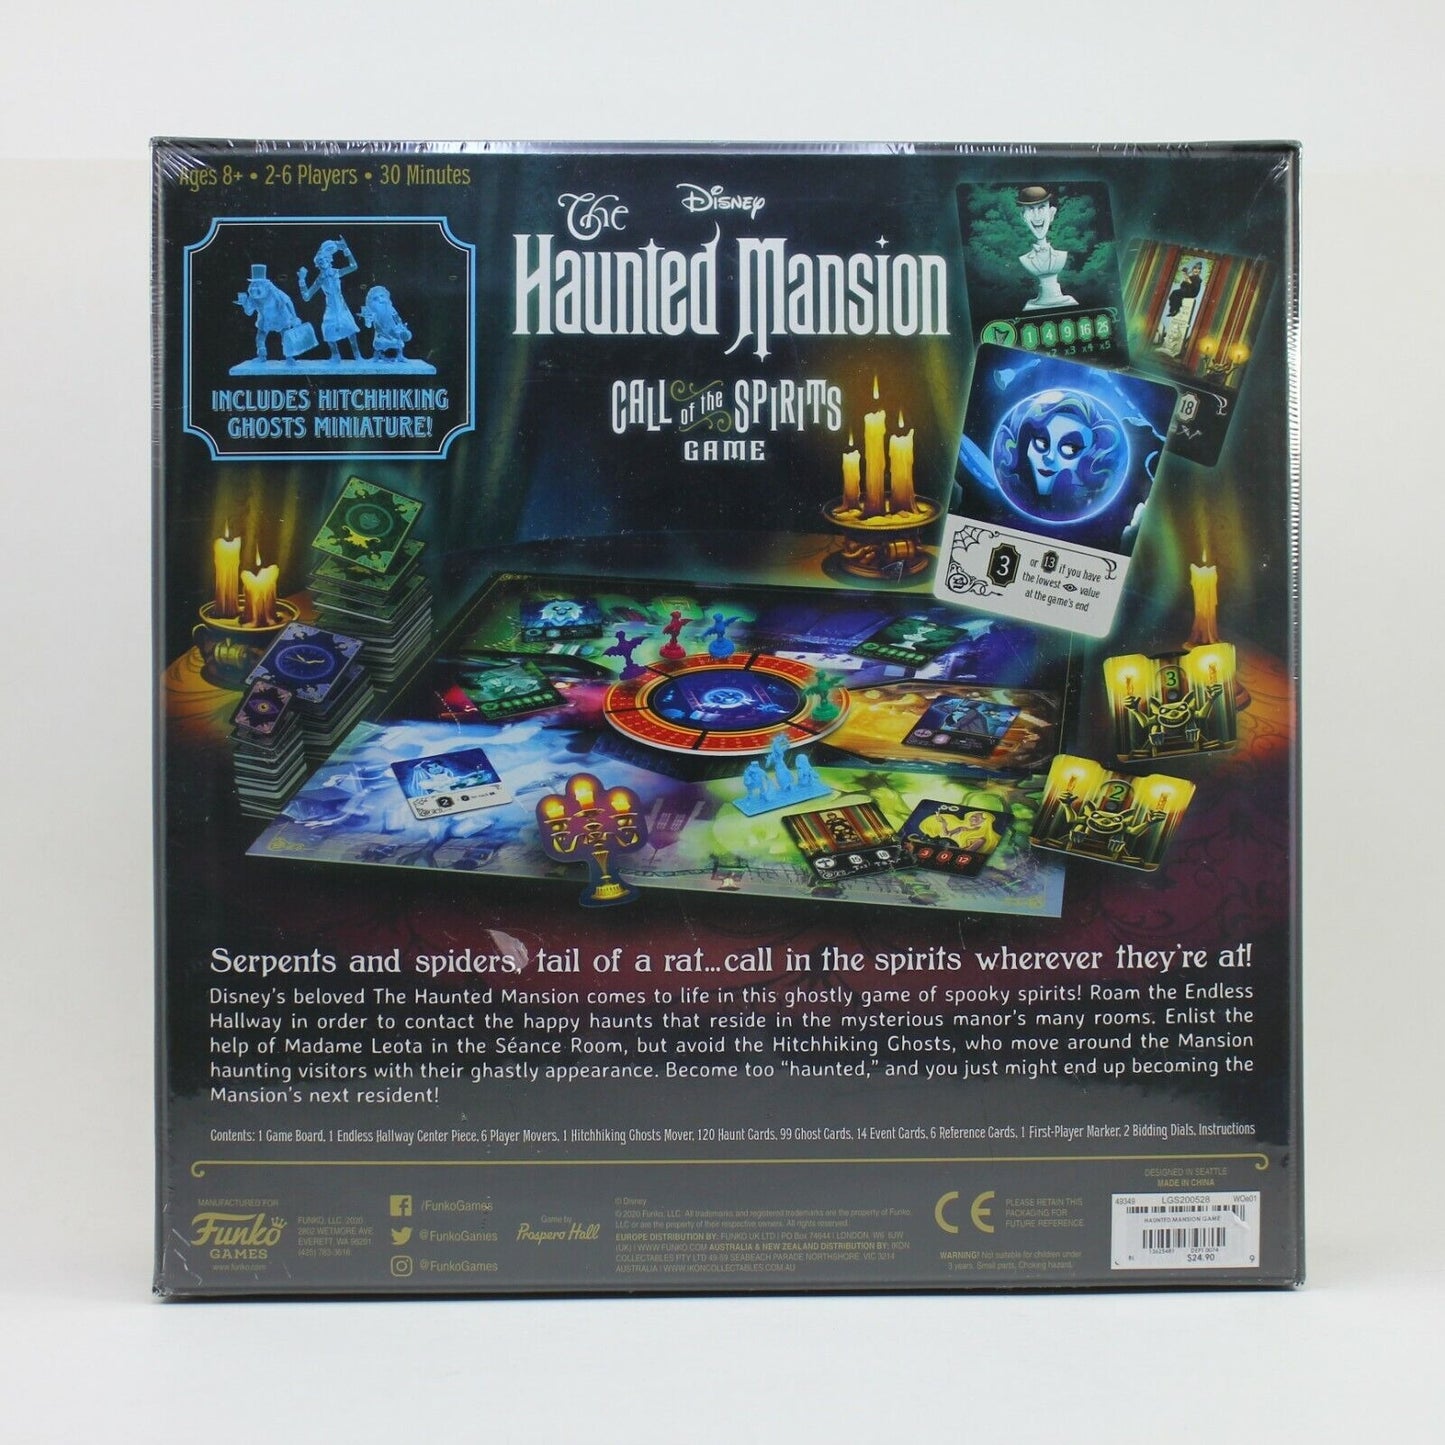 Funko Disney The Haunted Mansion Call of the Spirits Board Game